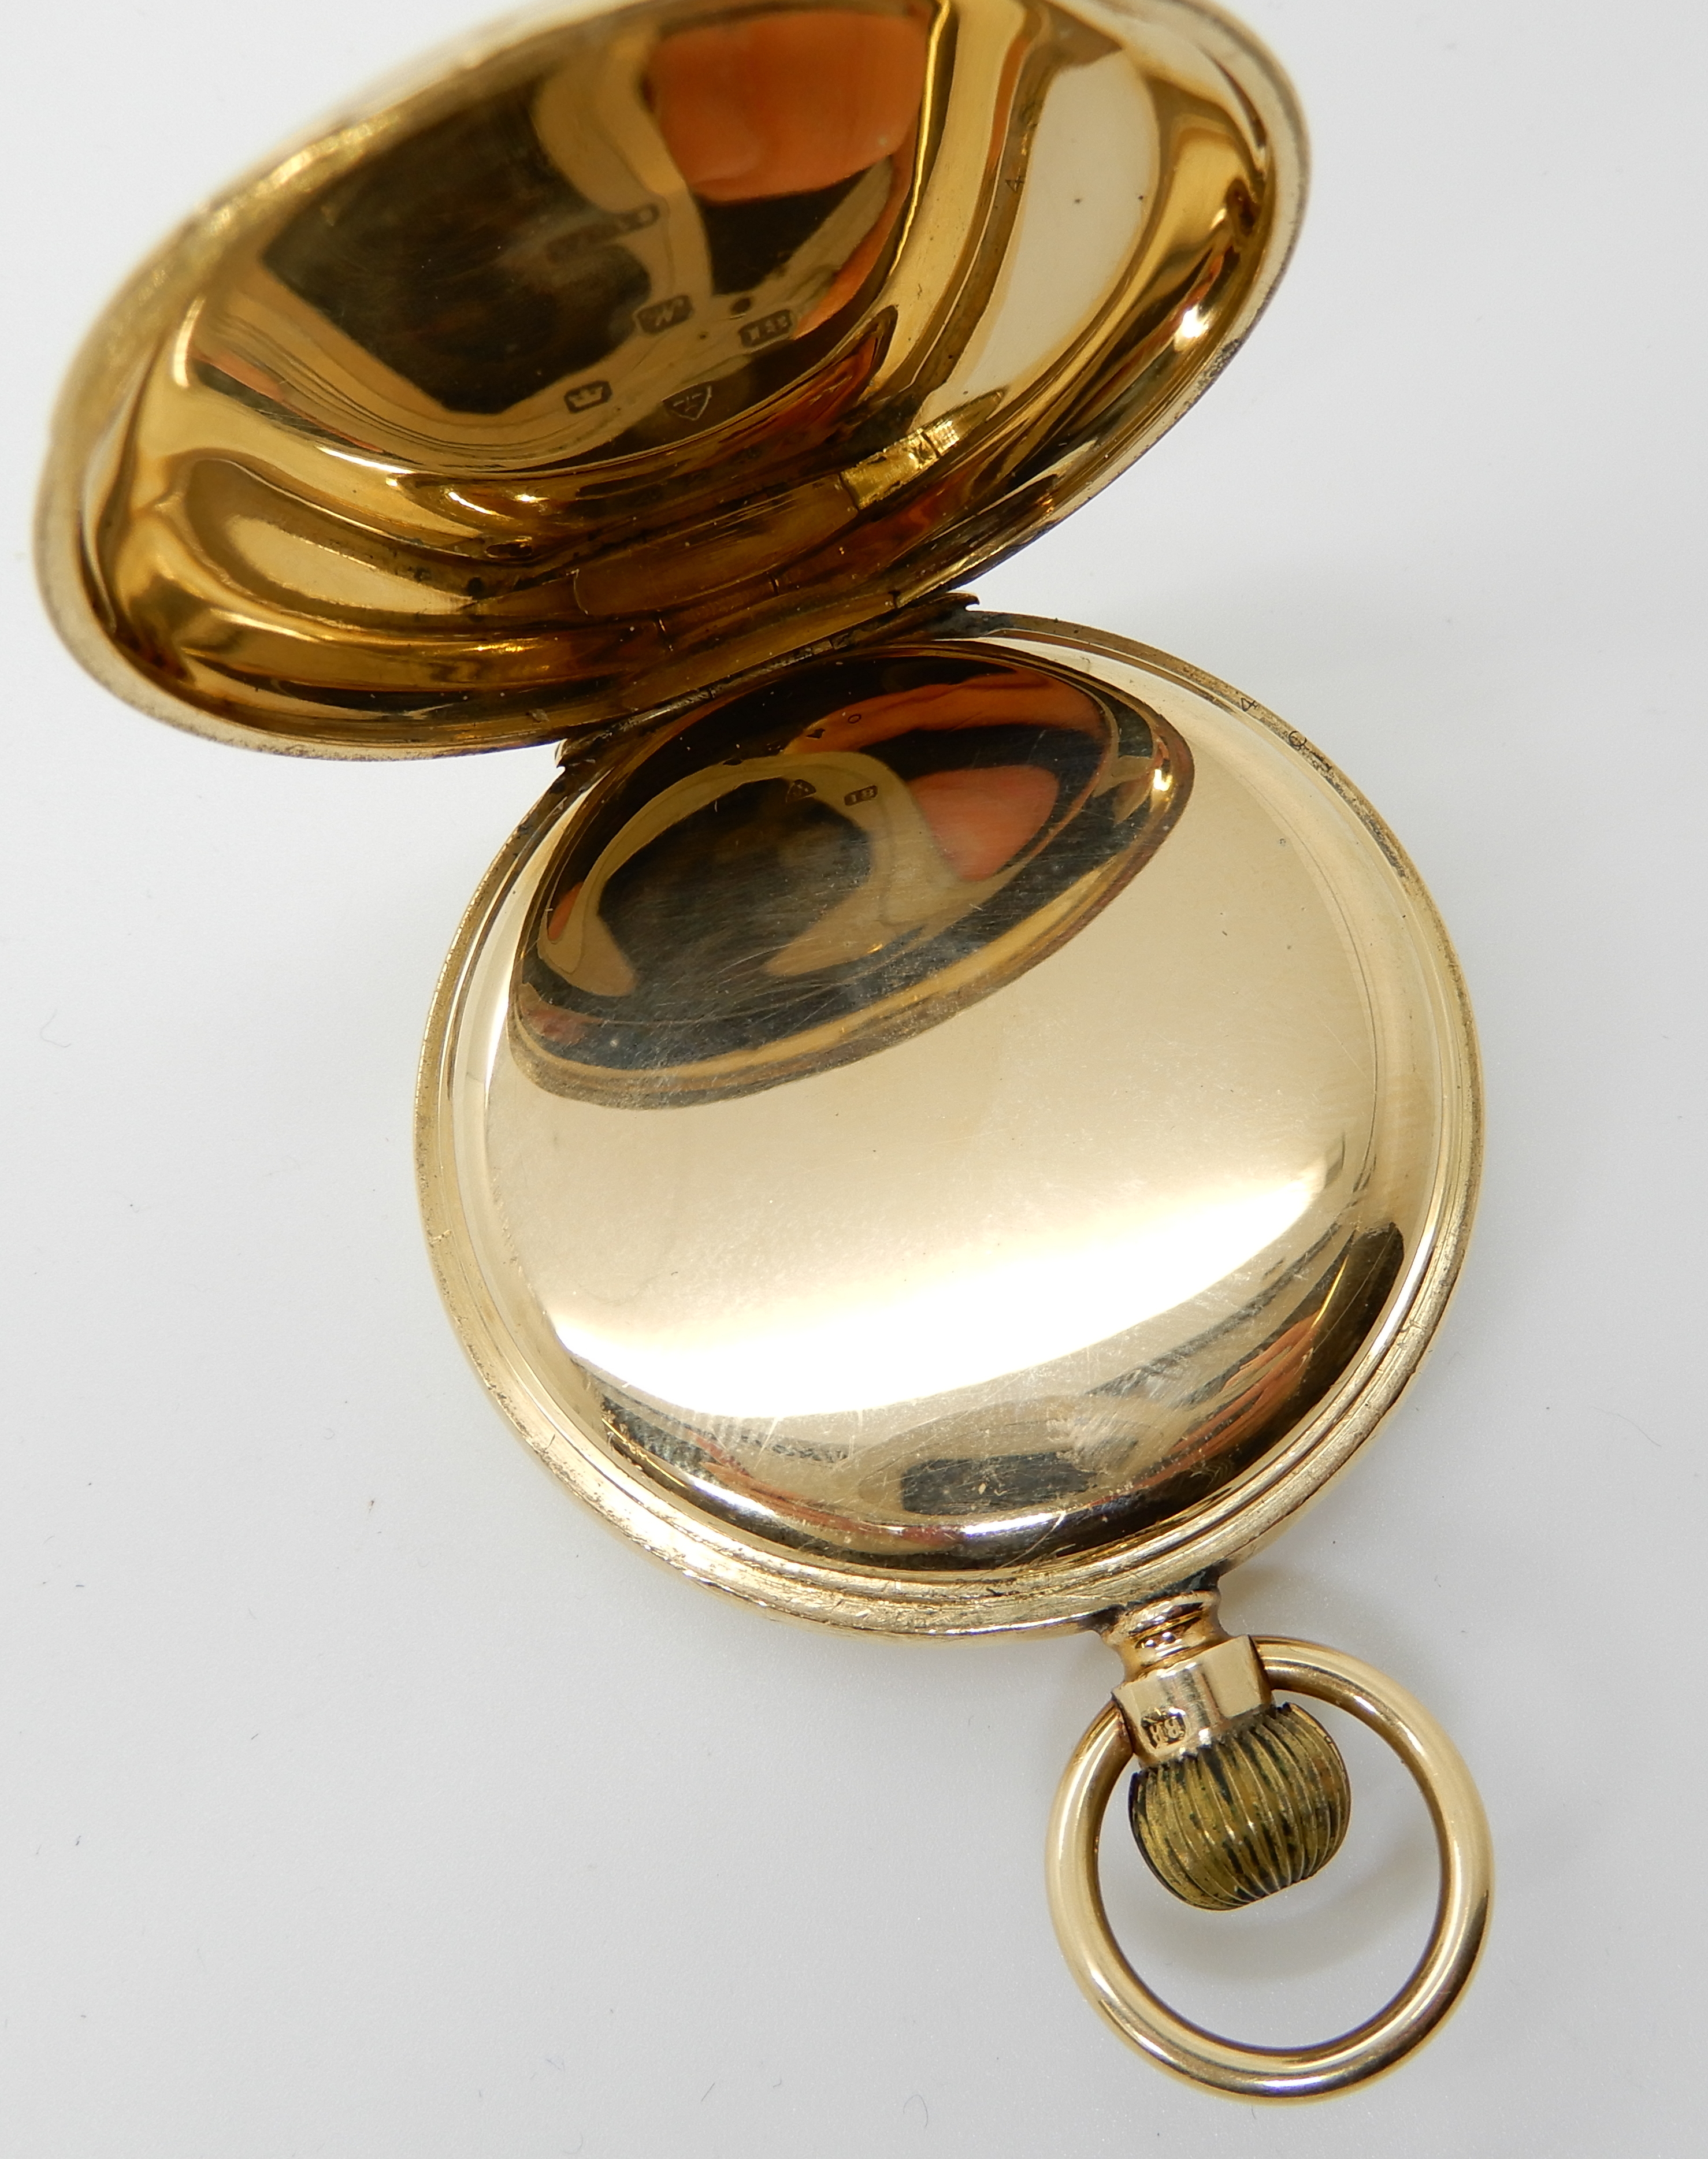 AN 18CT GOLD WALTHAM HALF HUNTER POCKET WATCH with white enamel dial, black Roman numerals, - Image 4 of 6